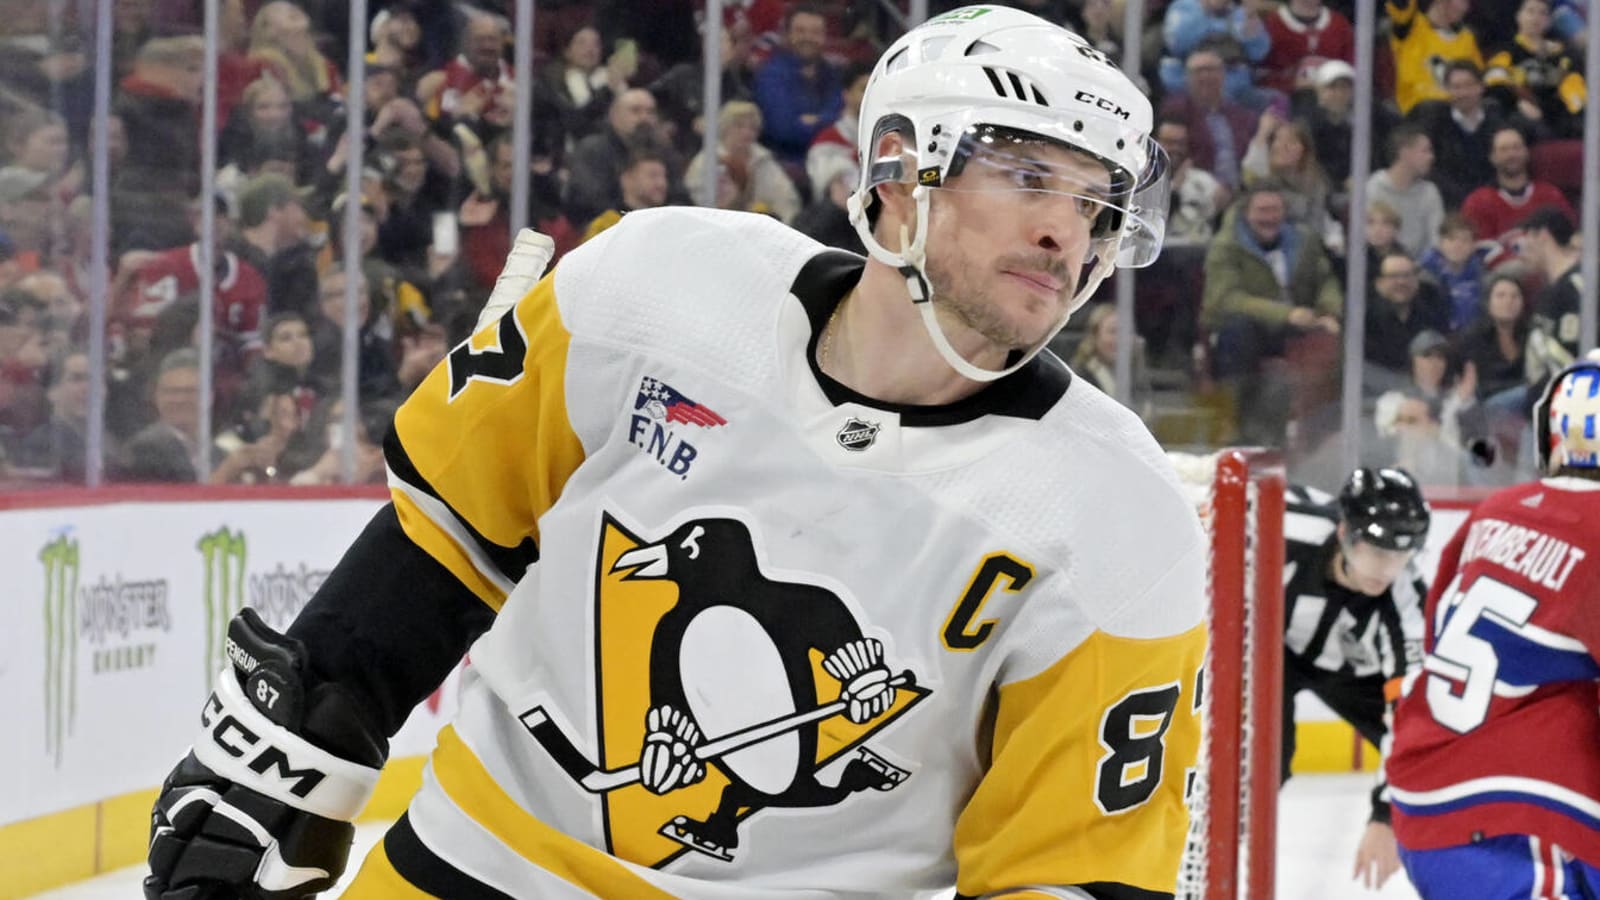 Penguins' Sidney Crosby ties one legend, passes another